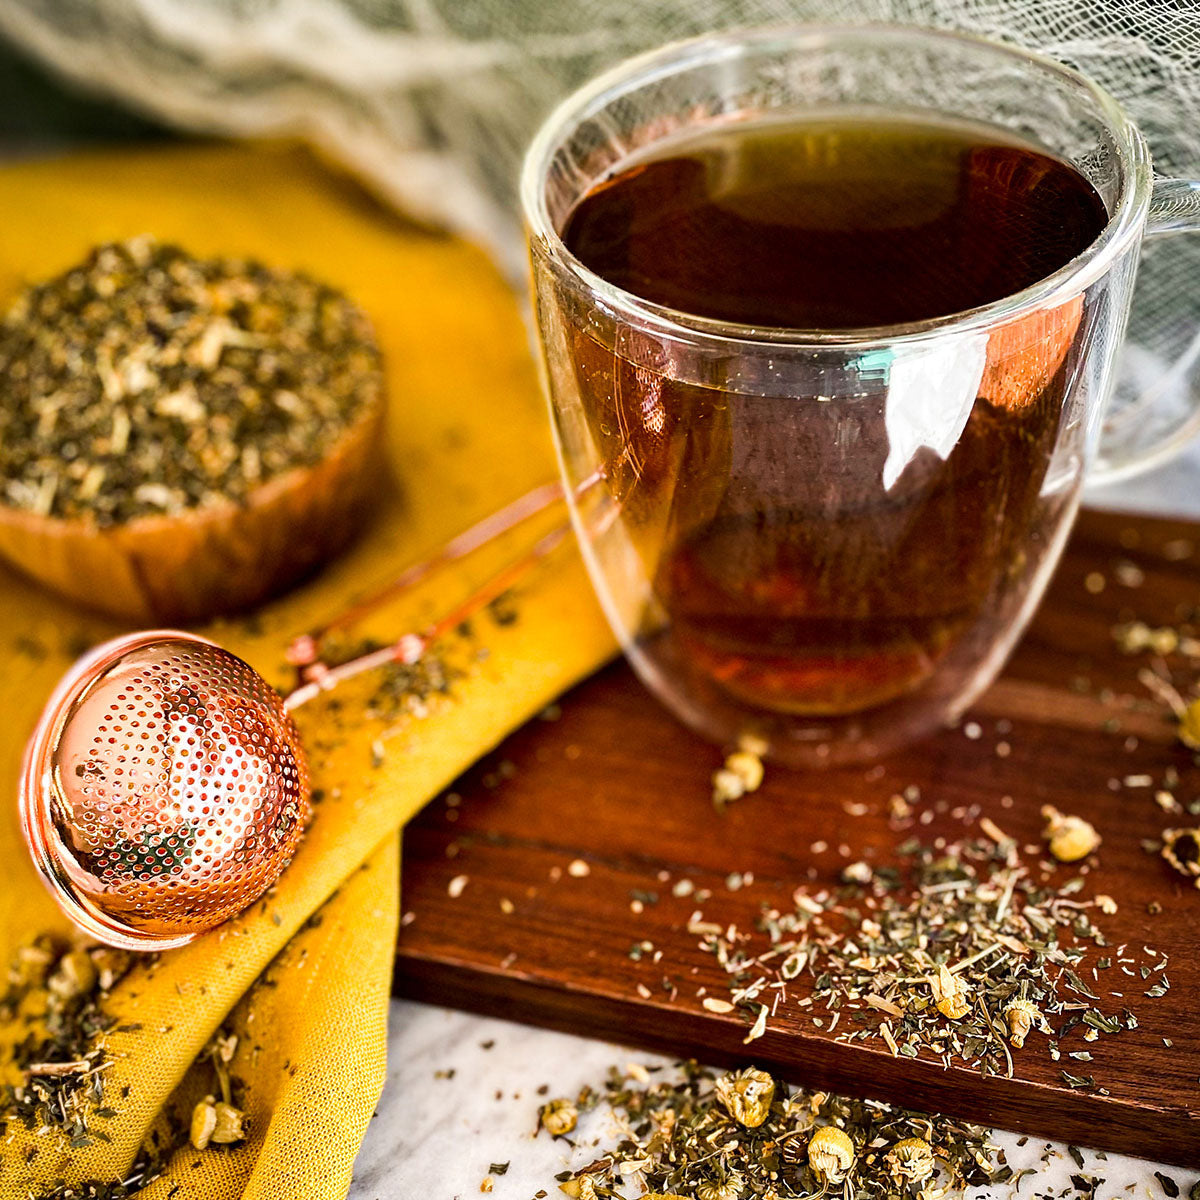 A rose gold tea infuser and brewed cup of cold comfort tea on a wooden surface with loose leaf tea sprinkled on the table.